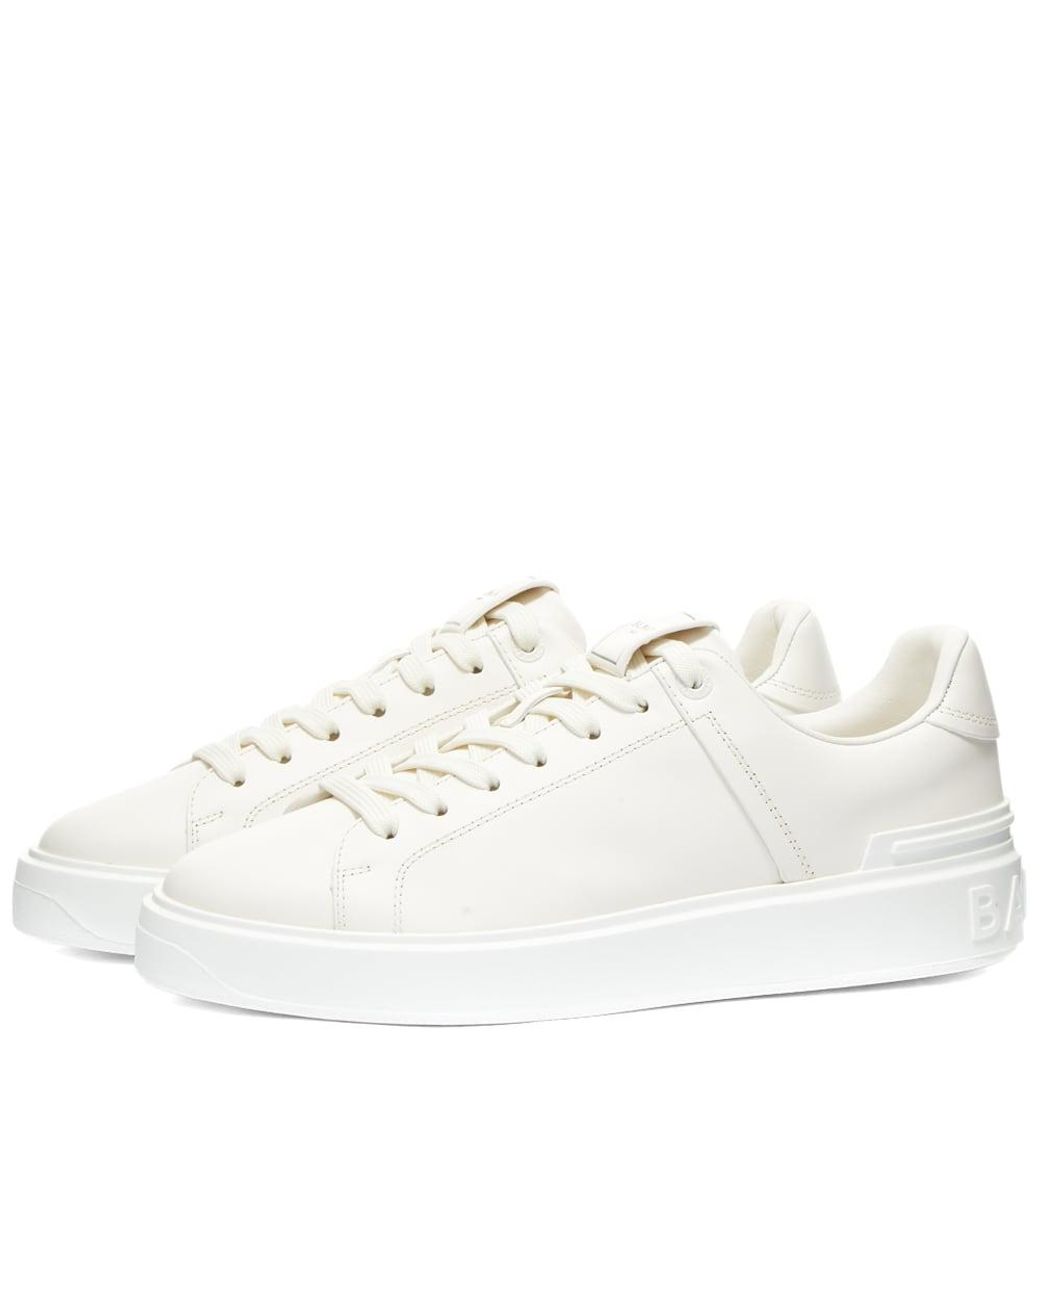 Balmain Leather B Court Calfskin Sneakers in White | Lyst